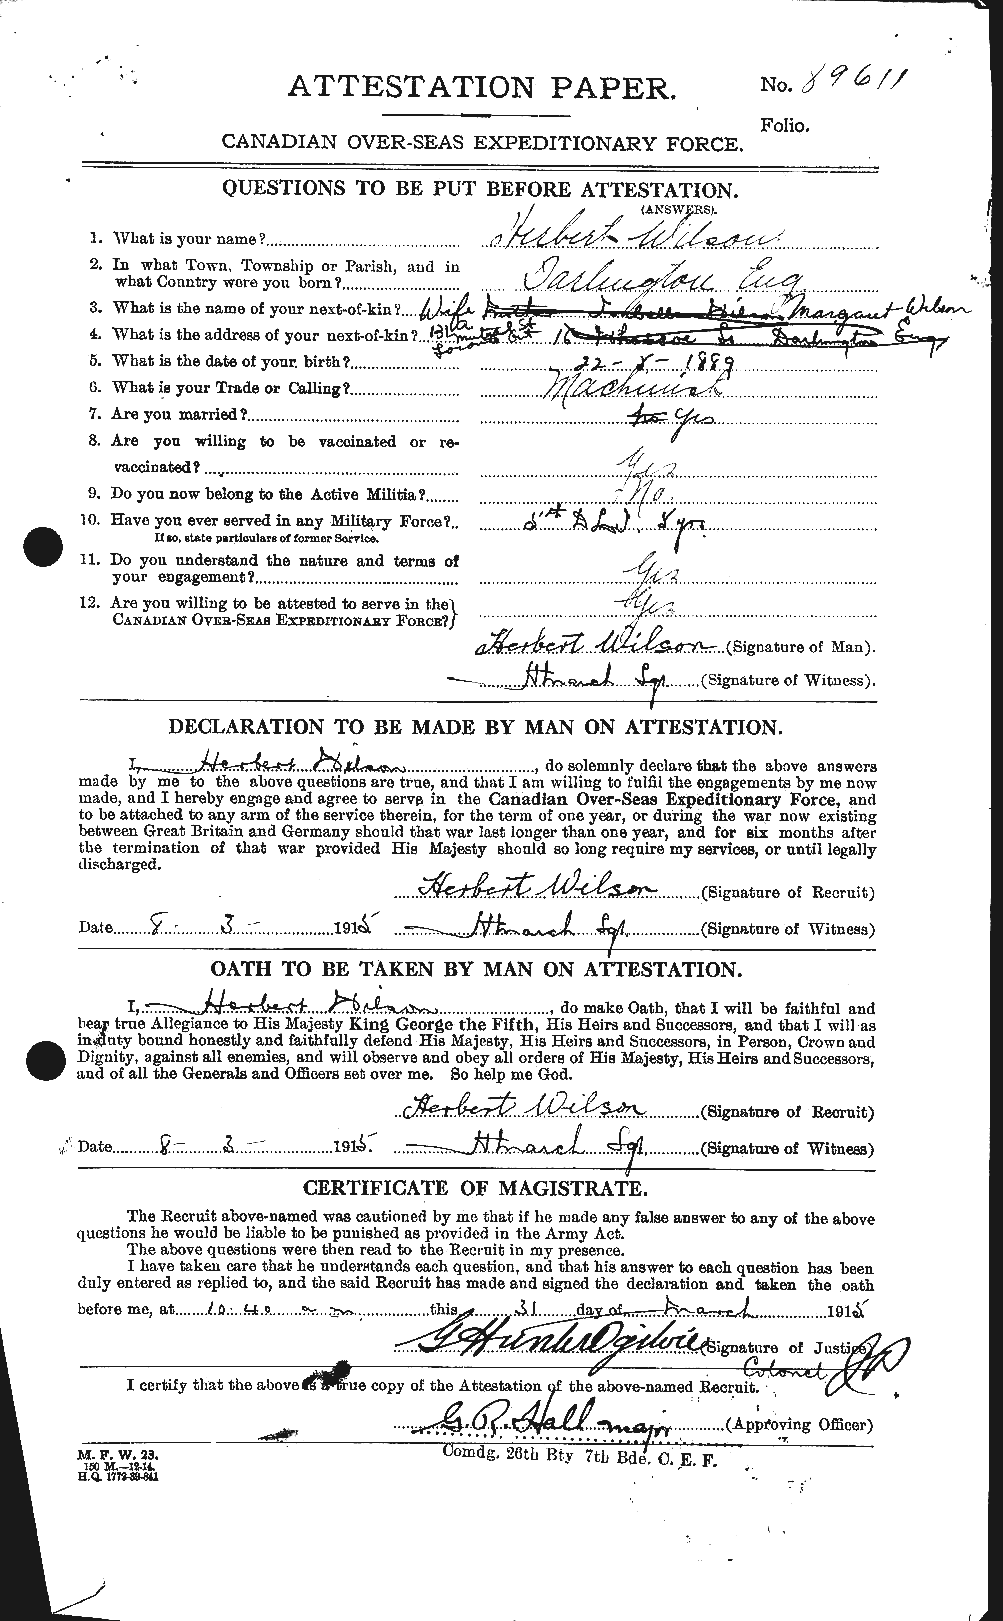 Personnel Records of the First World War - CEF 679547a